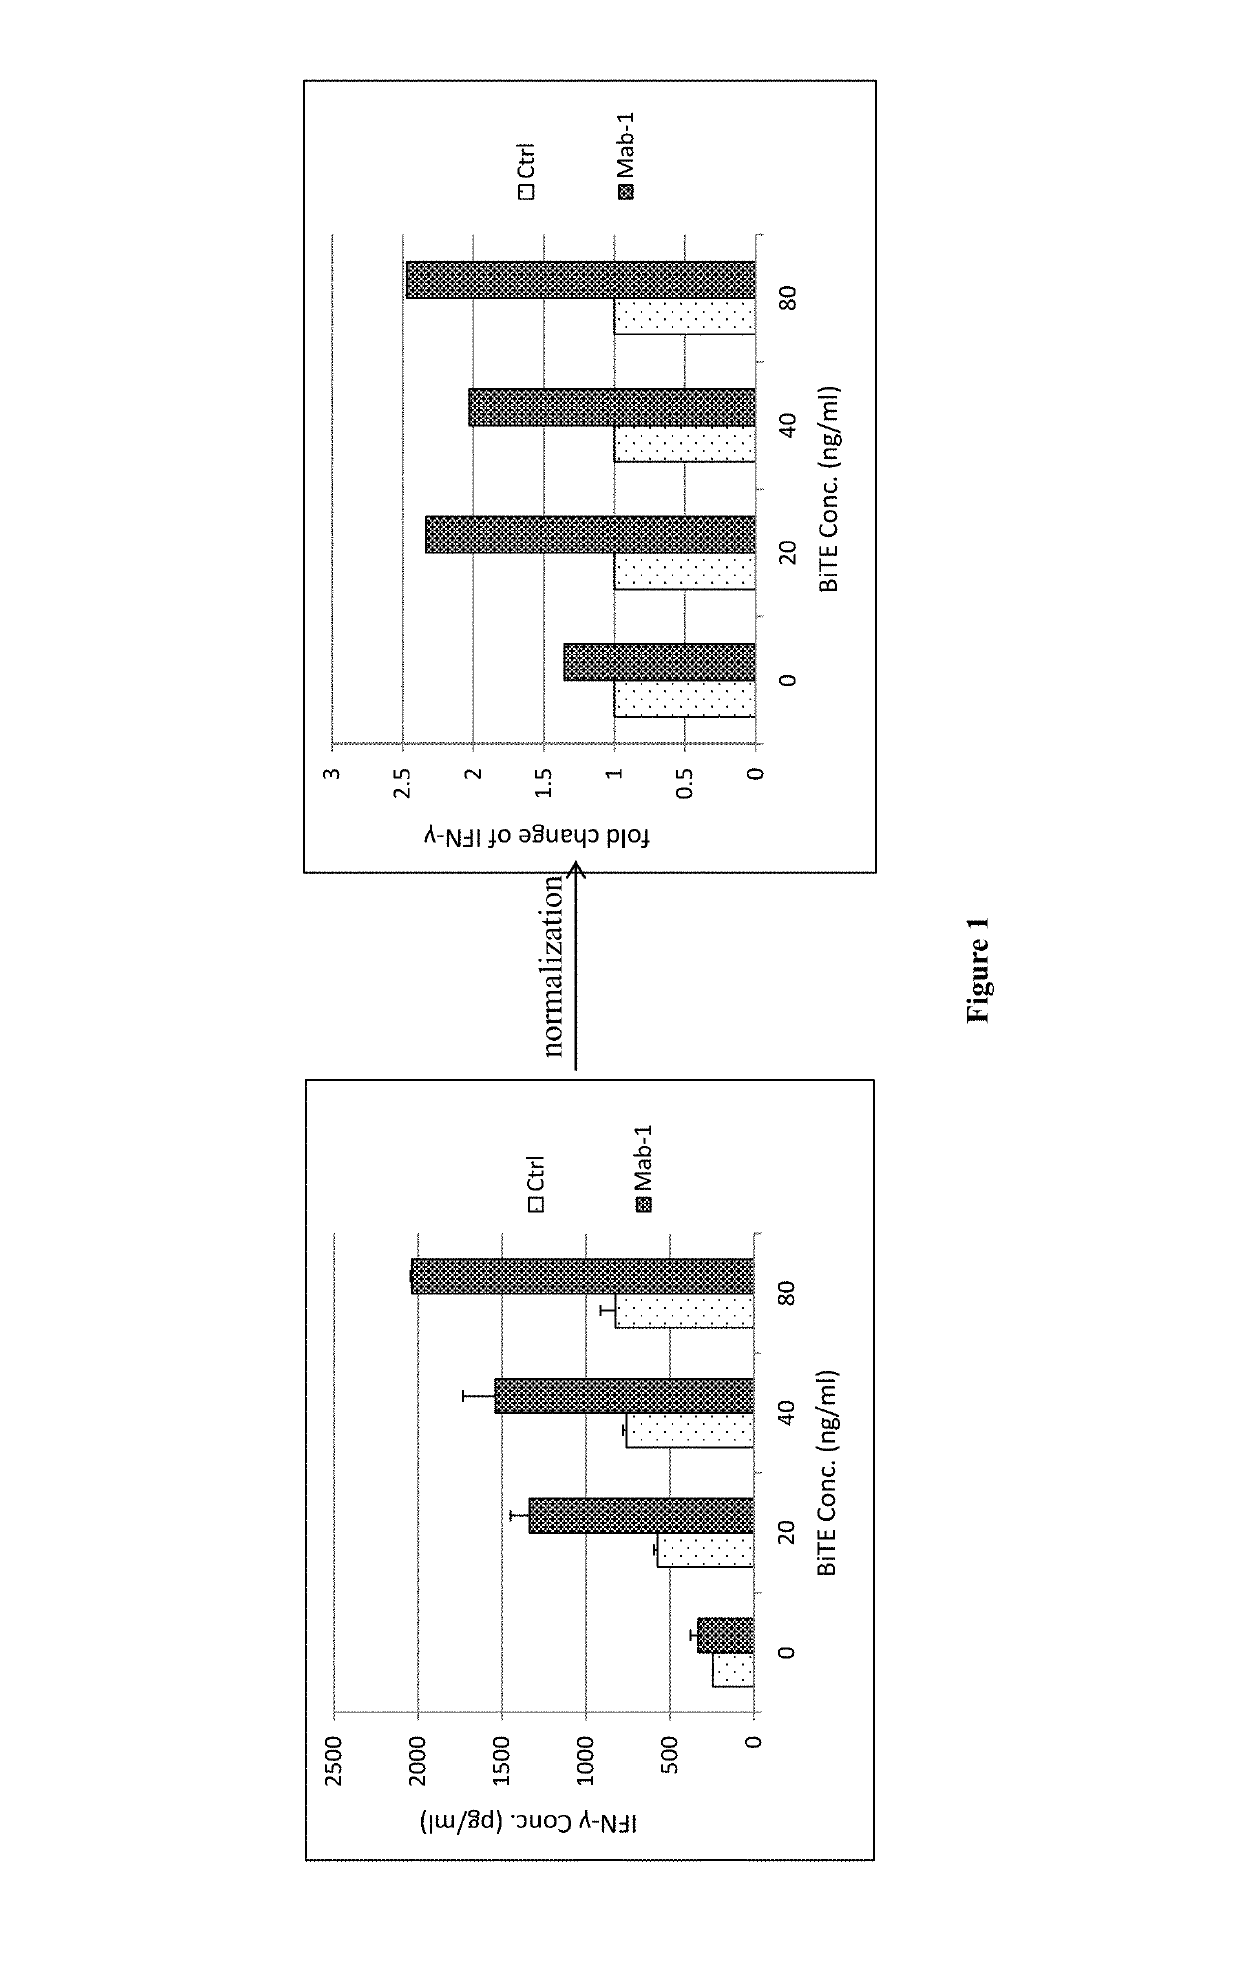 Method for predicting efficacy of immune checkpoint inhibitors in cancer patients